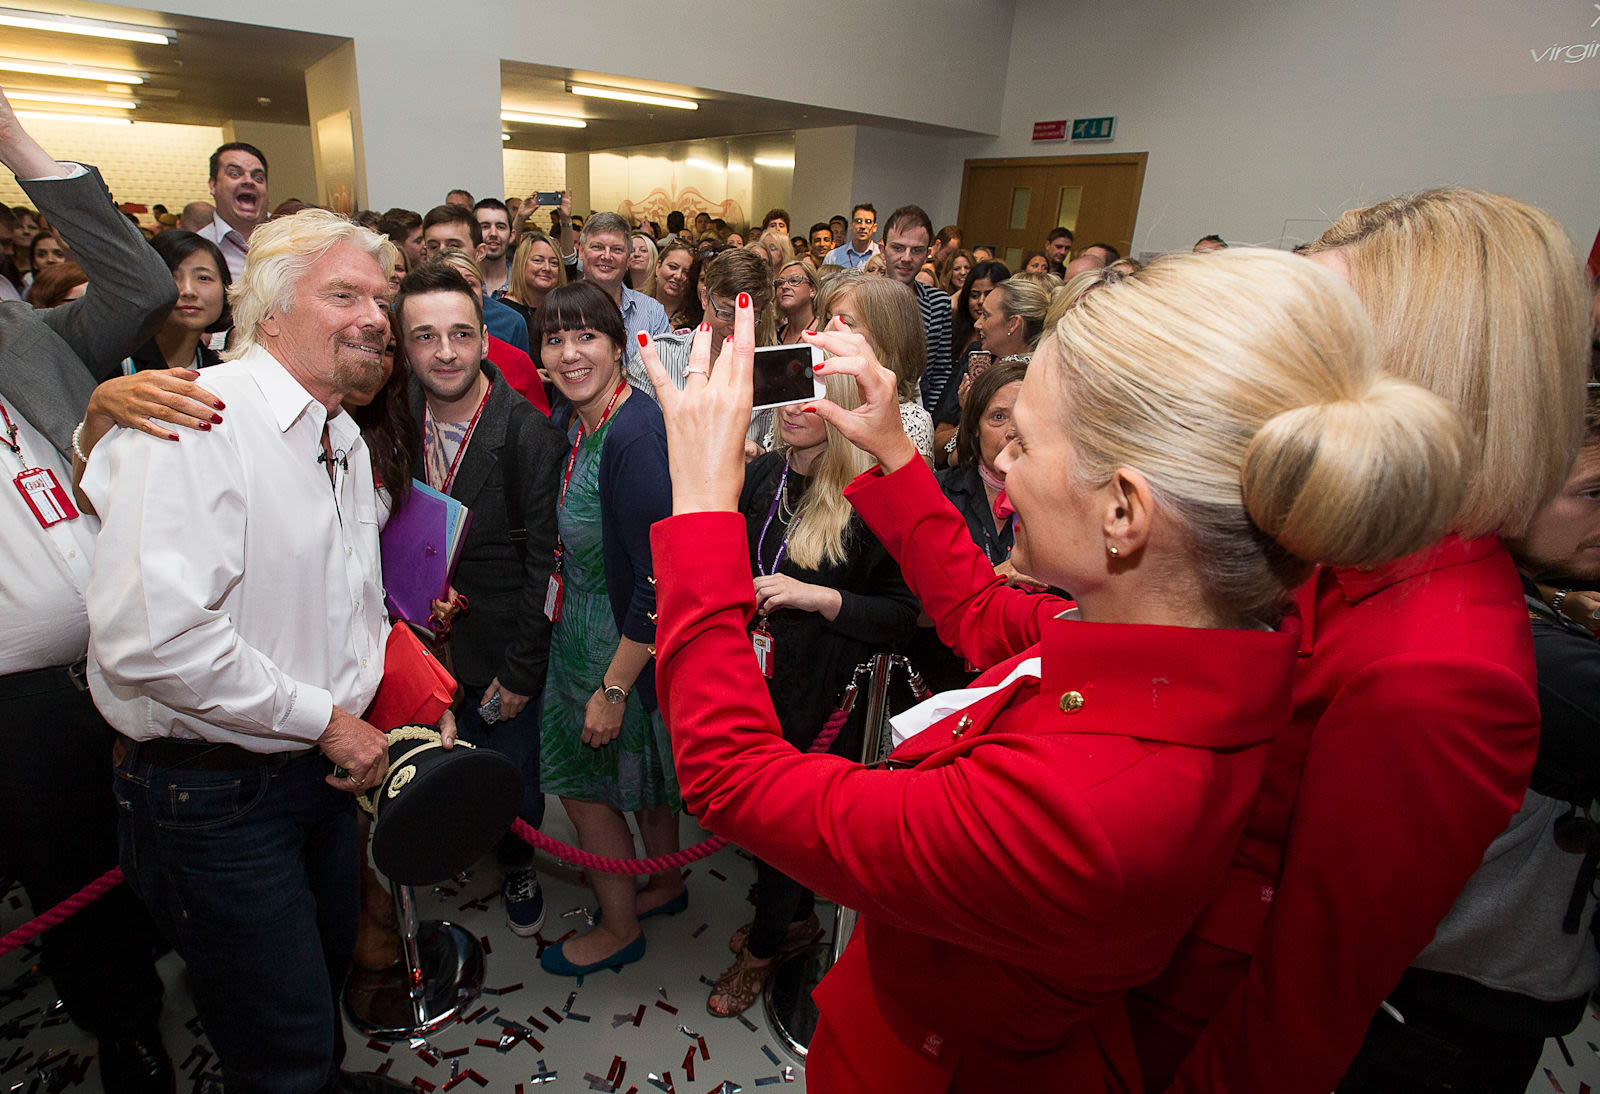 Virgin Atlantic employee taking a picture of Richard Branson and a supporter